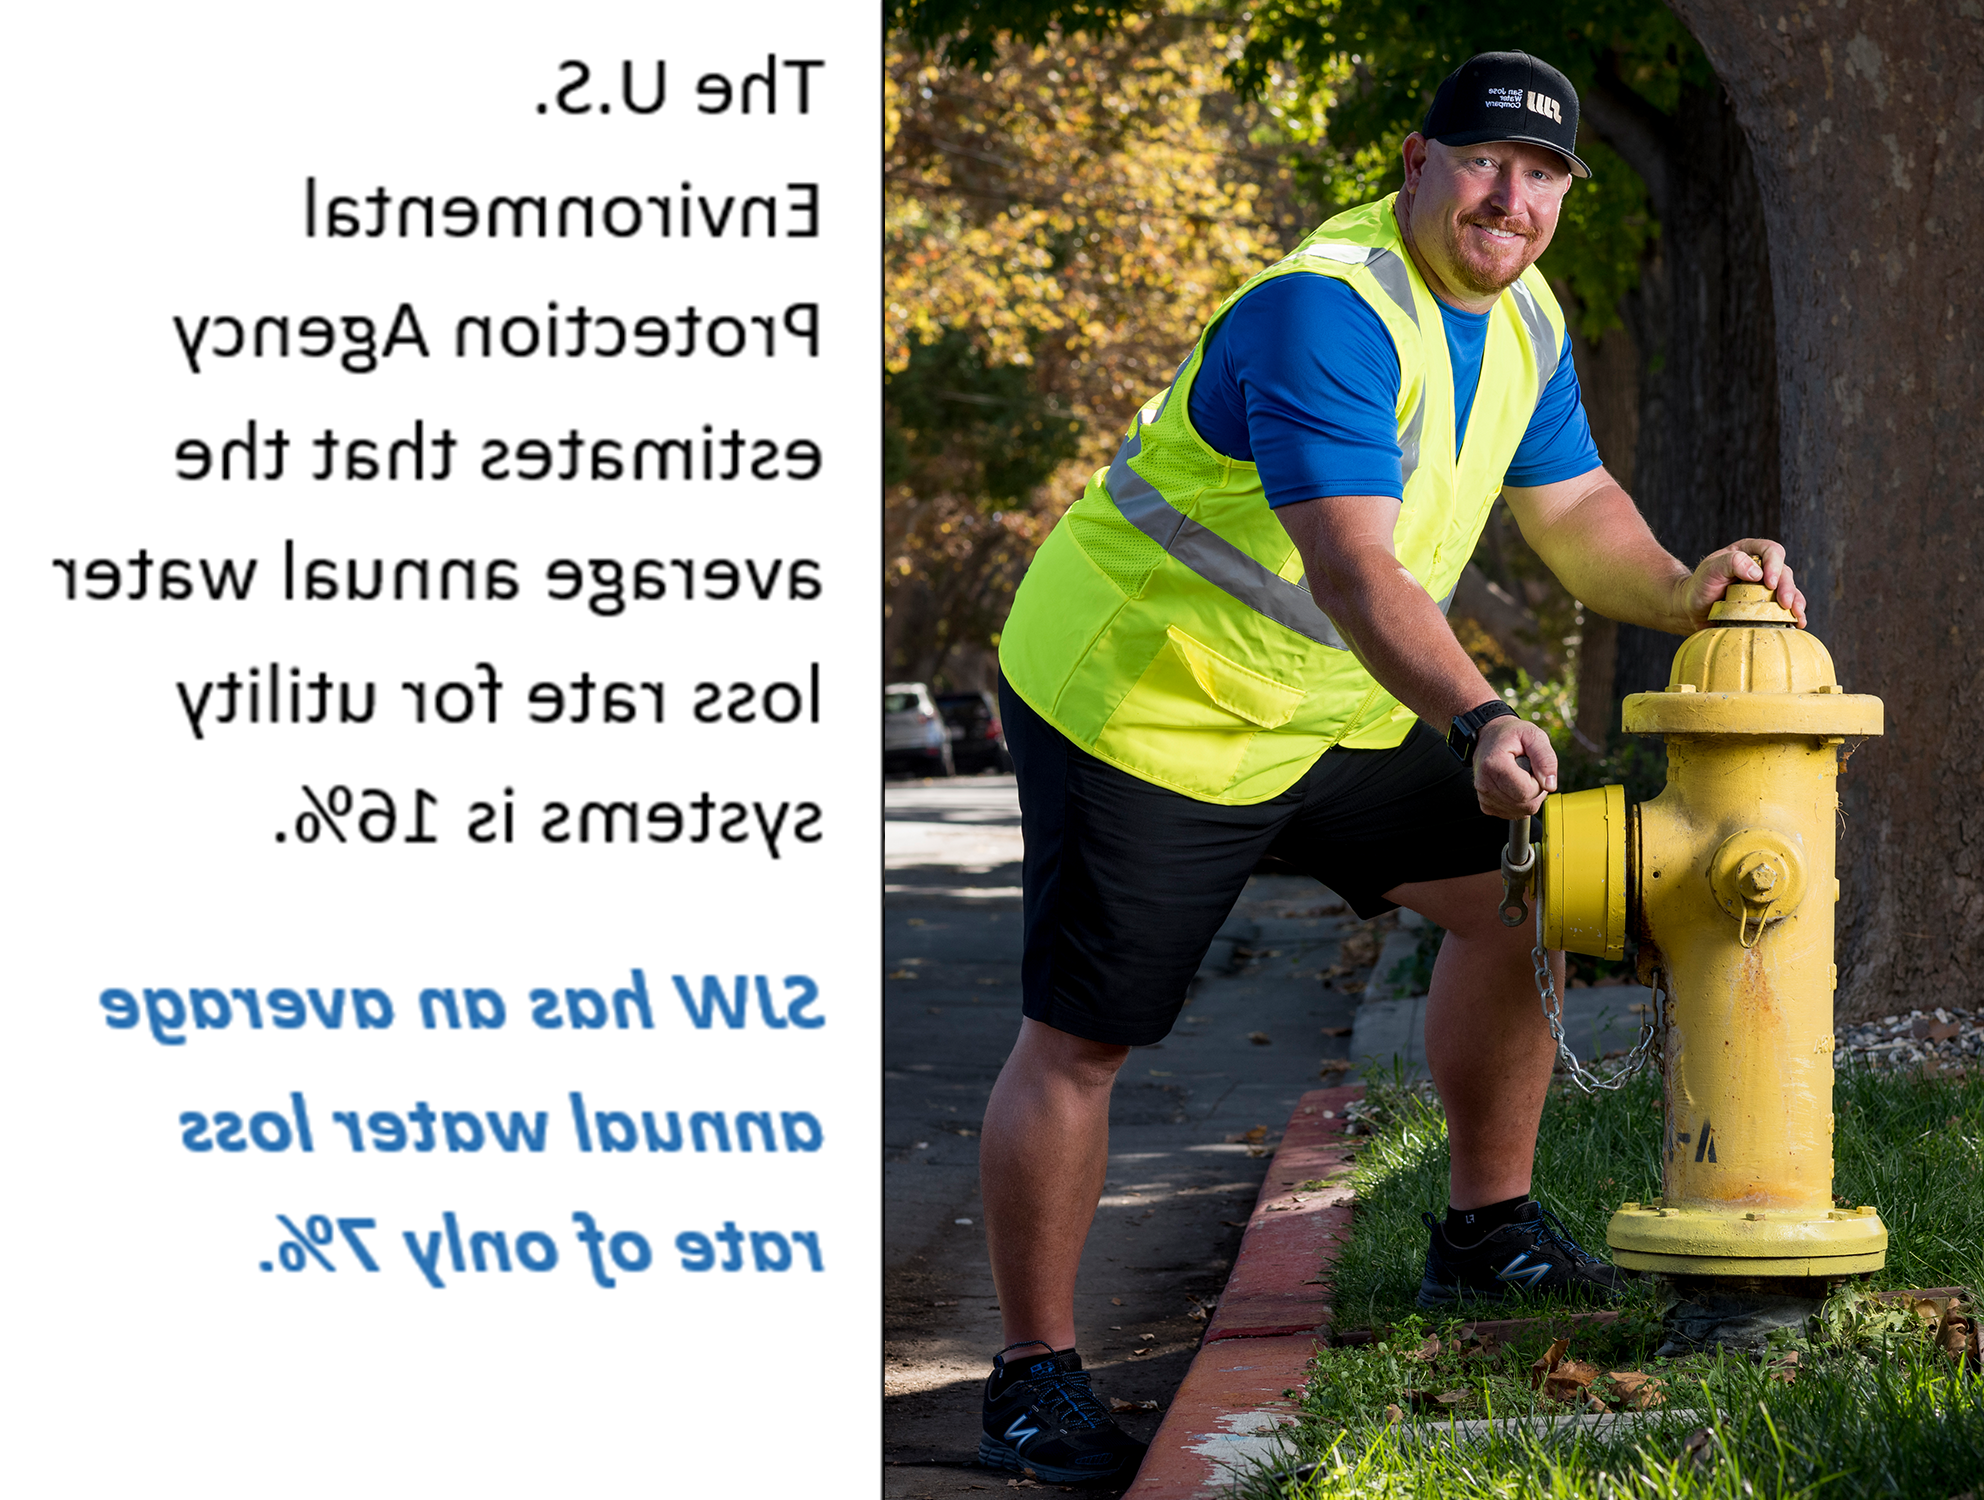 SJW employee shutting off a fire hydrant with a fact saying San Jose Water has an average annual water loss rate of only 7%